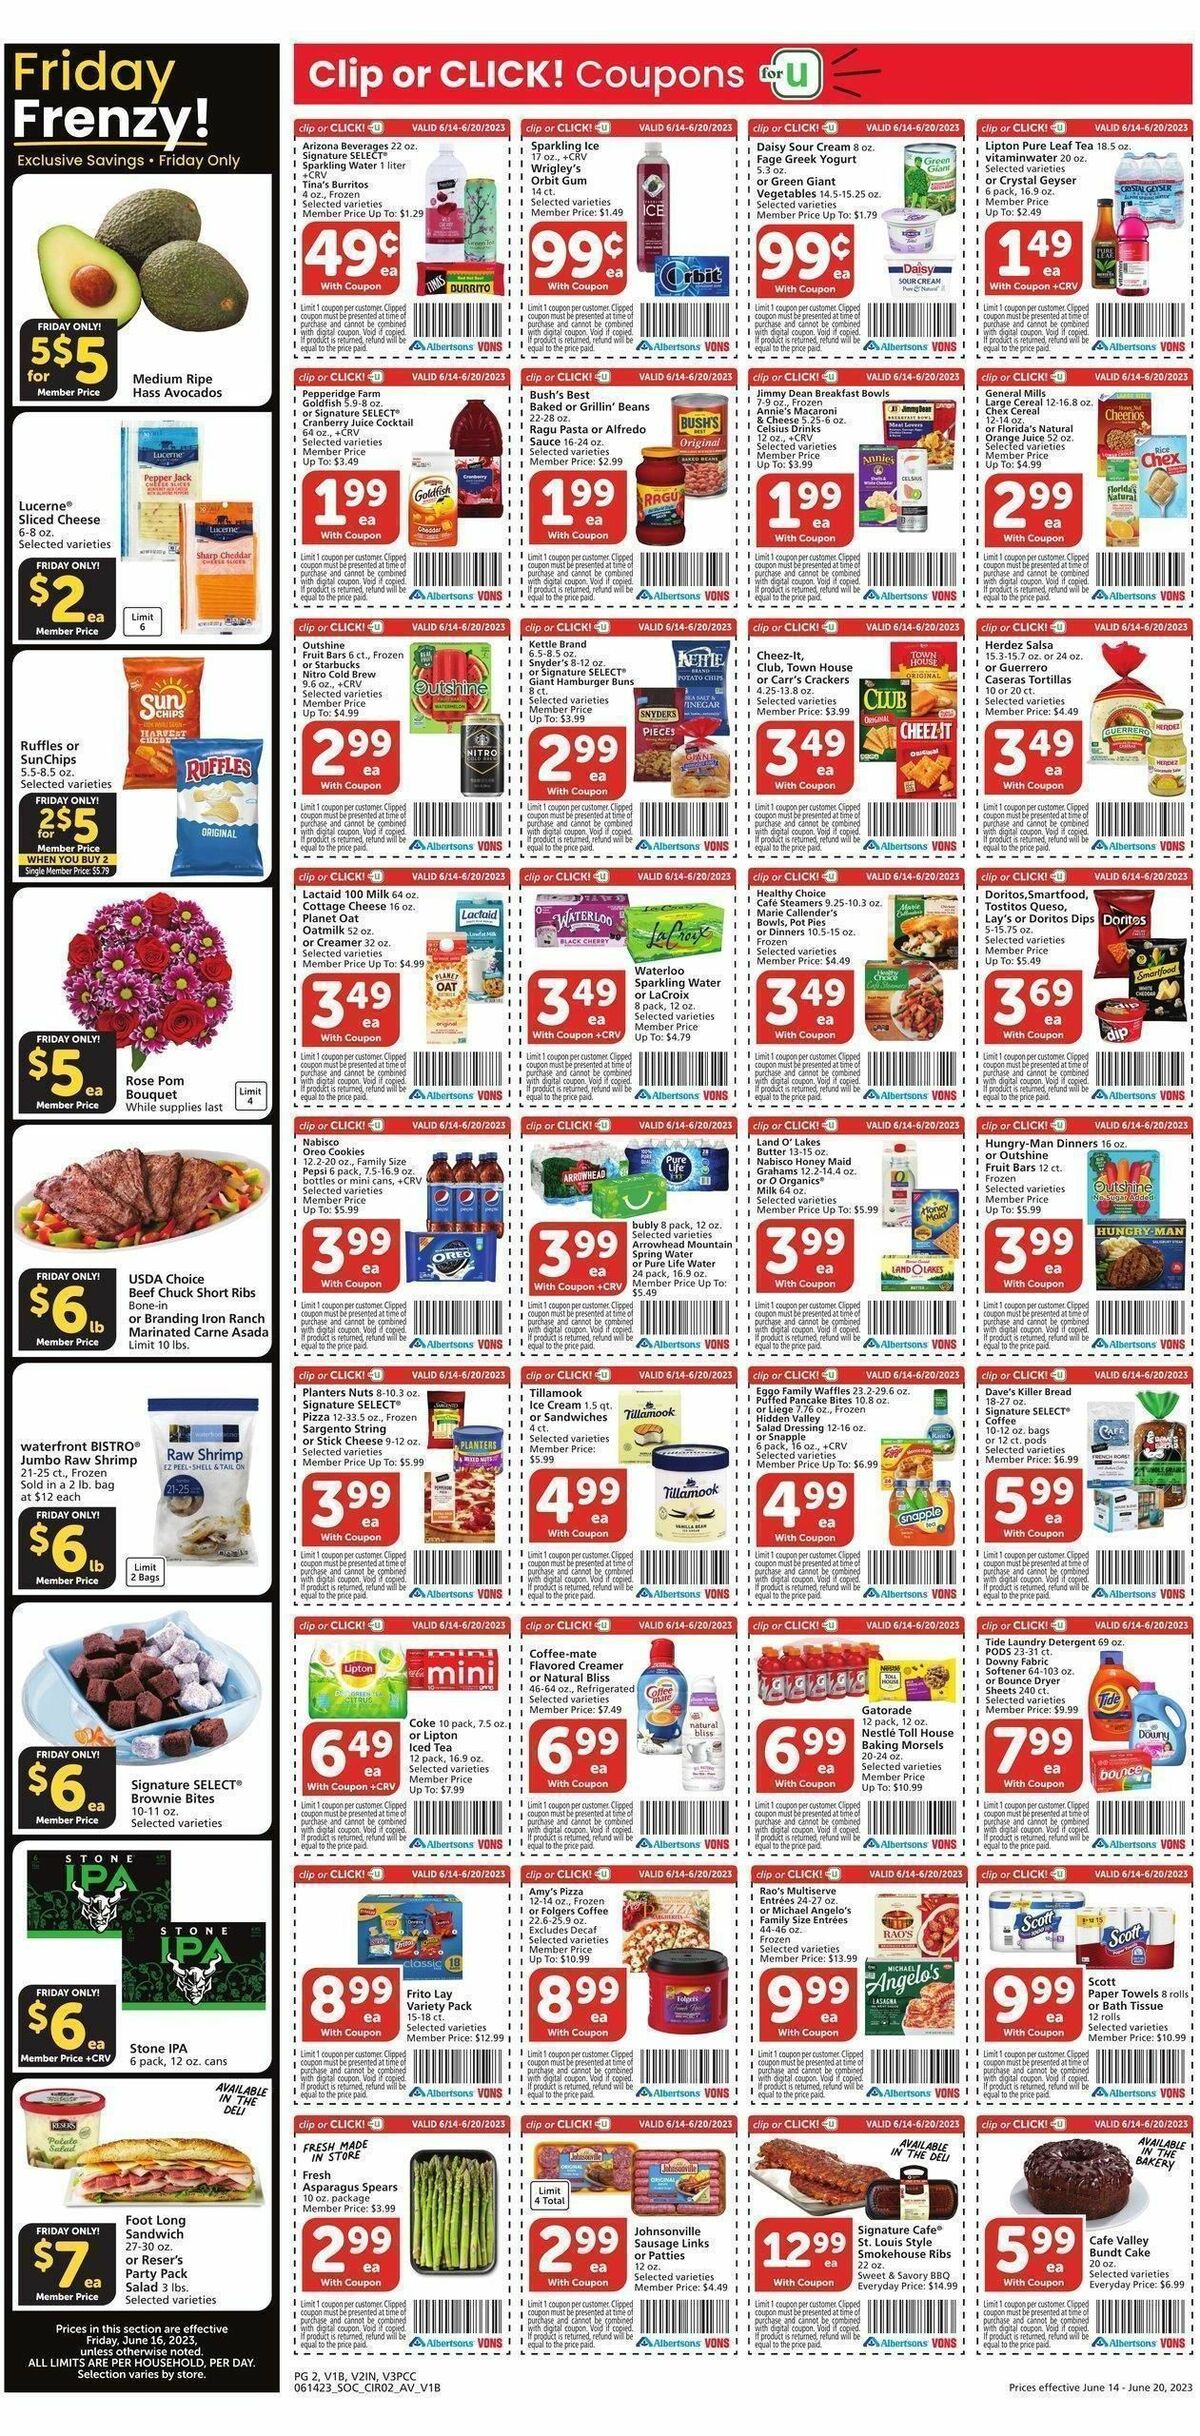 Vons Weekly Ad from June 14